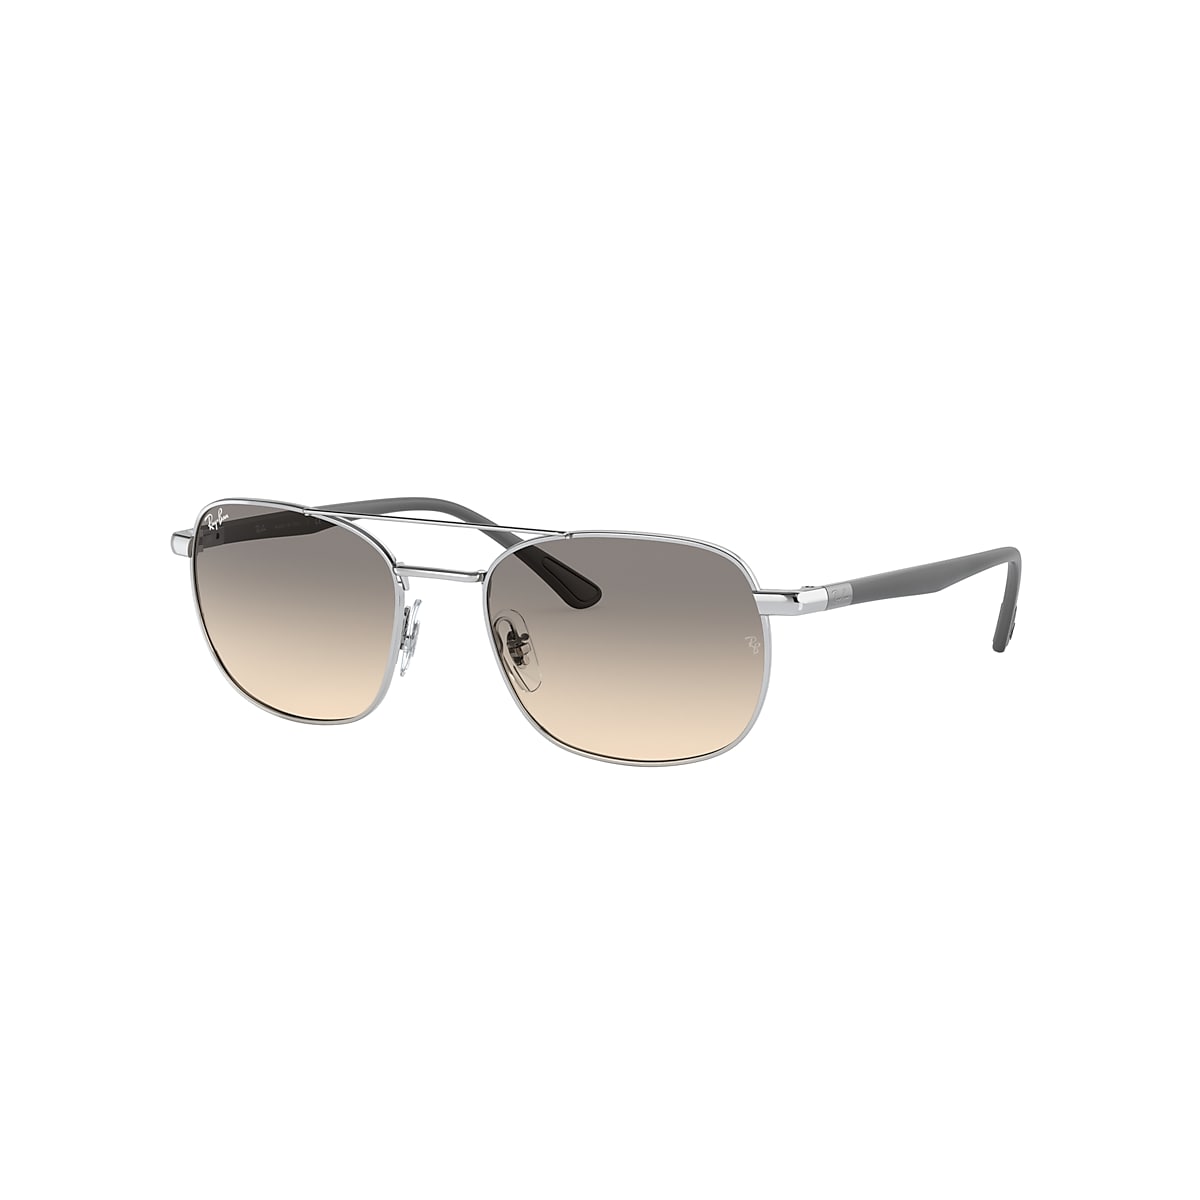 RB3670 Sunglasses in Silver and Light Grey - RB3670 | Ray-Ban® US